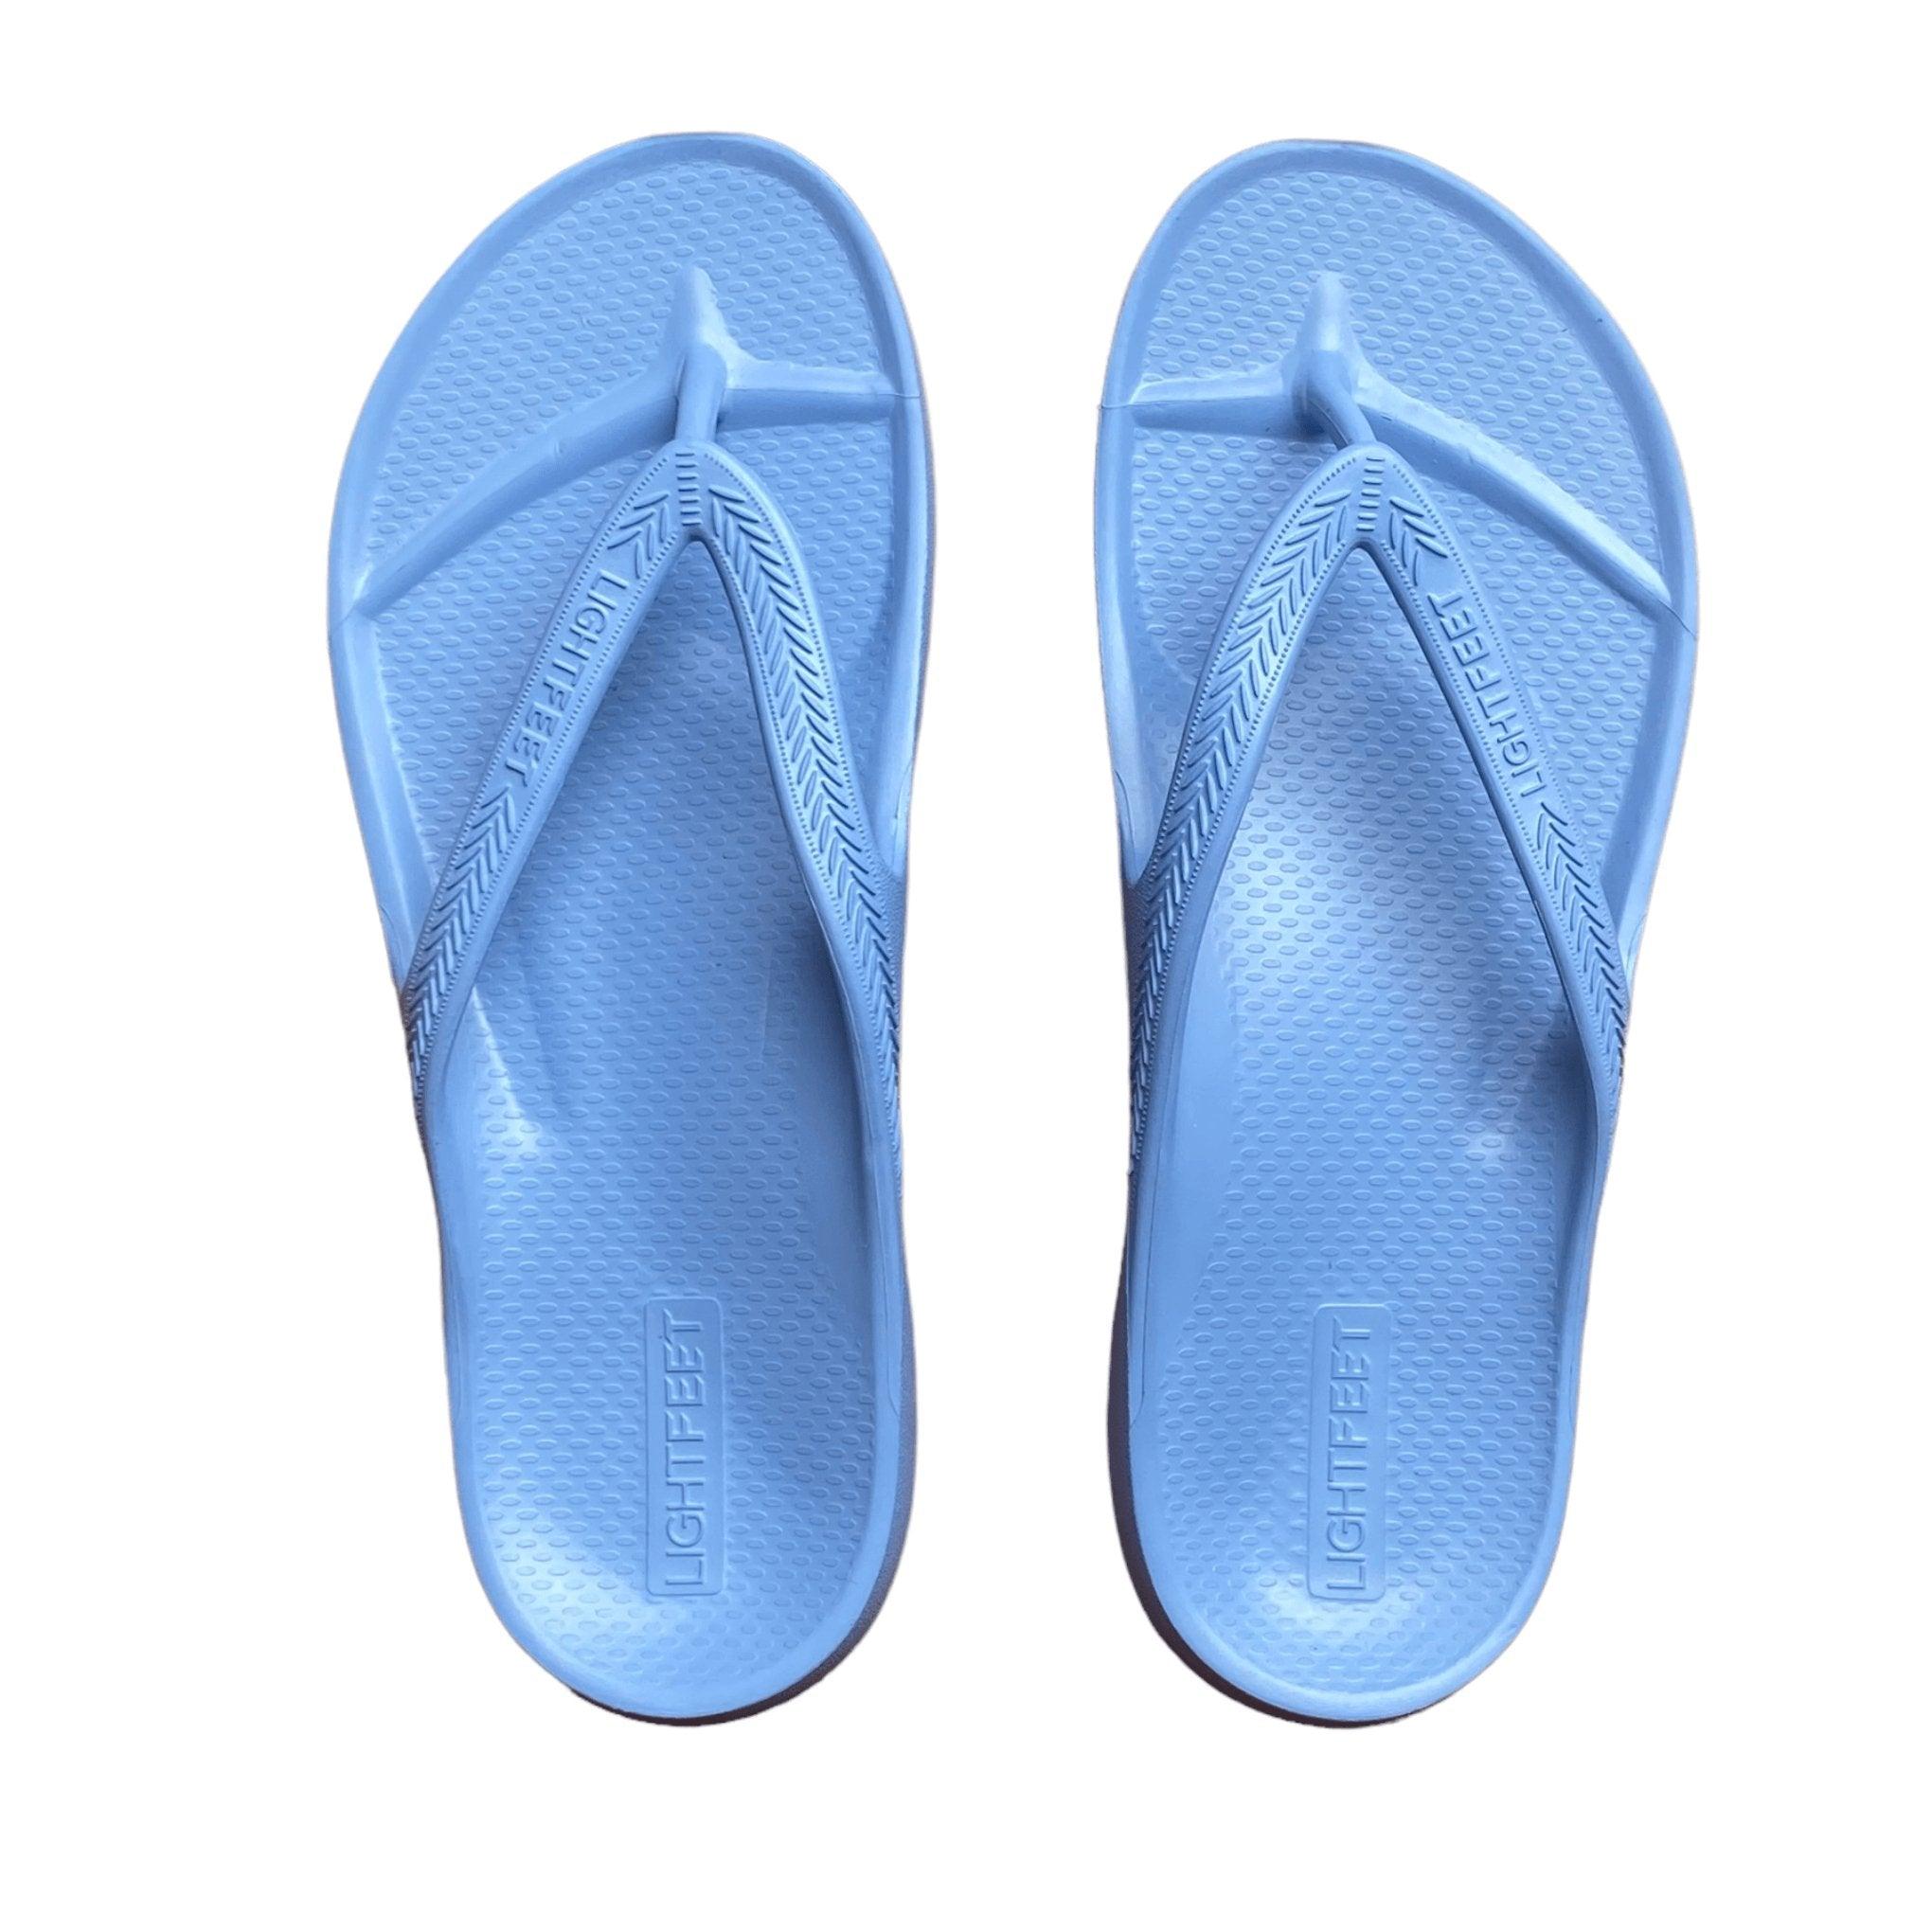 Lightfeet Revive Arch Support Thongs - The Foot Care Shop